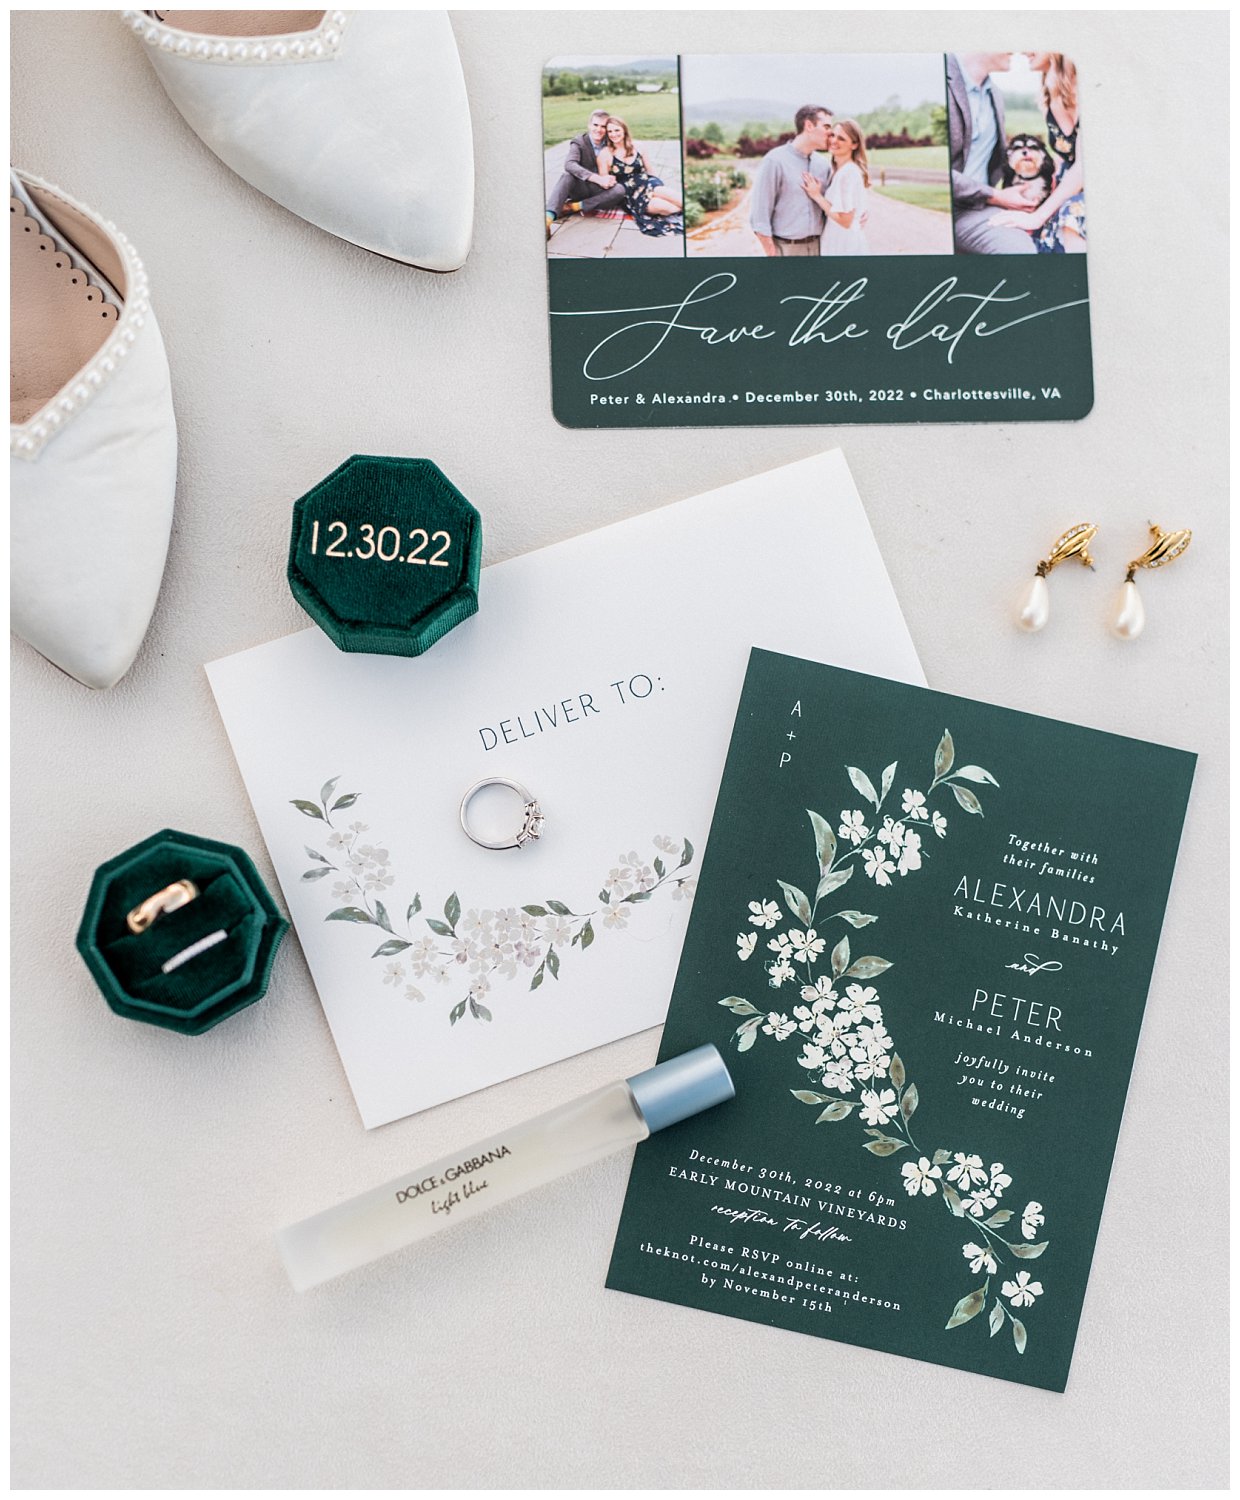 Wedding details and invitation suite at Early Mountain Vineyard in Charlottesville, Virginia